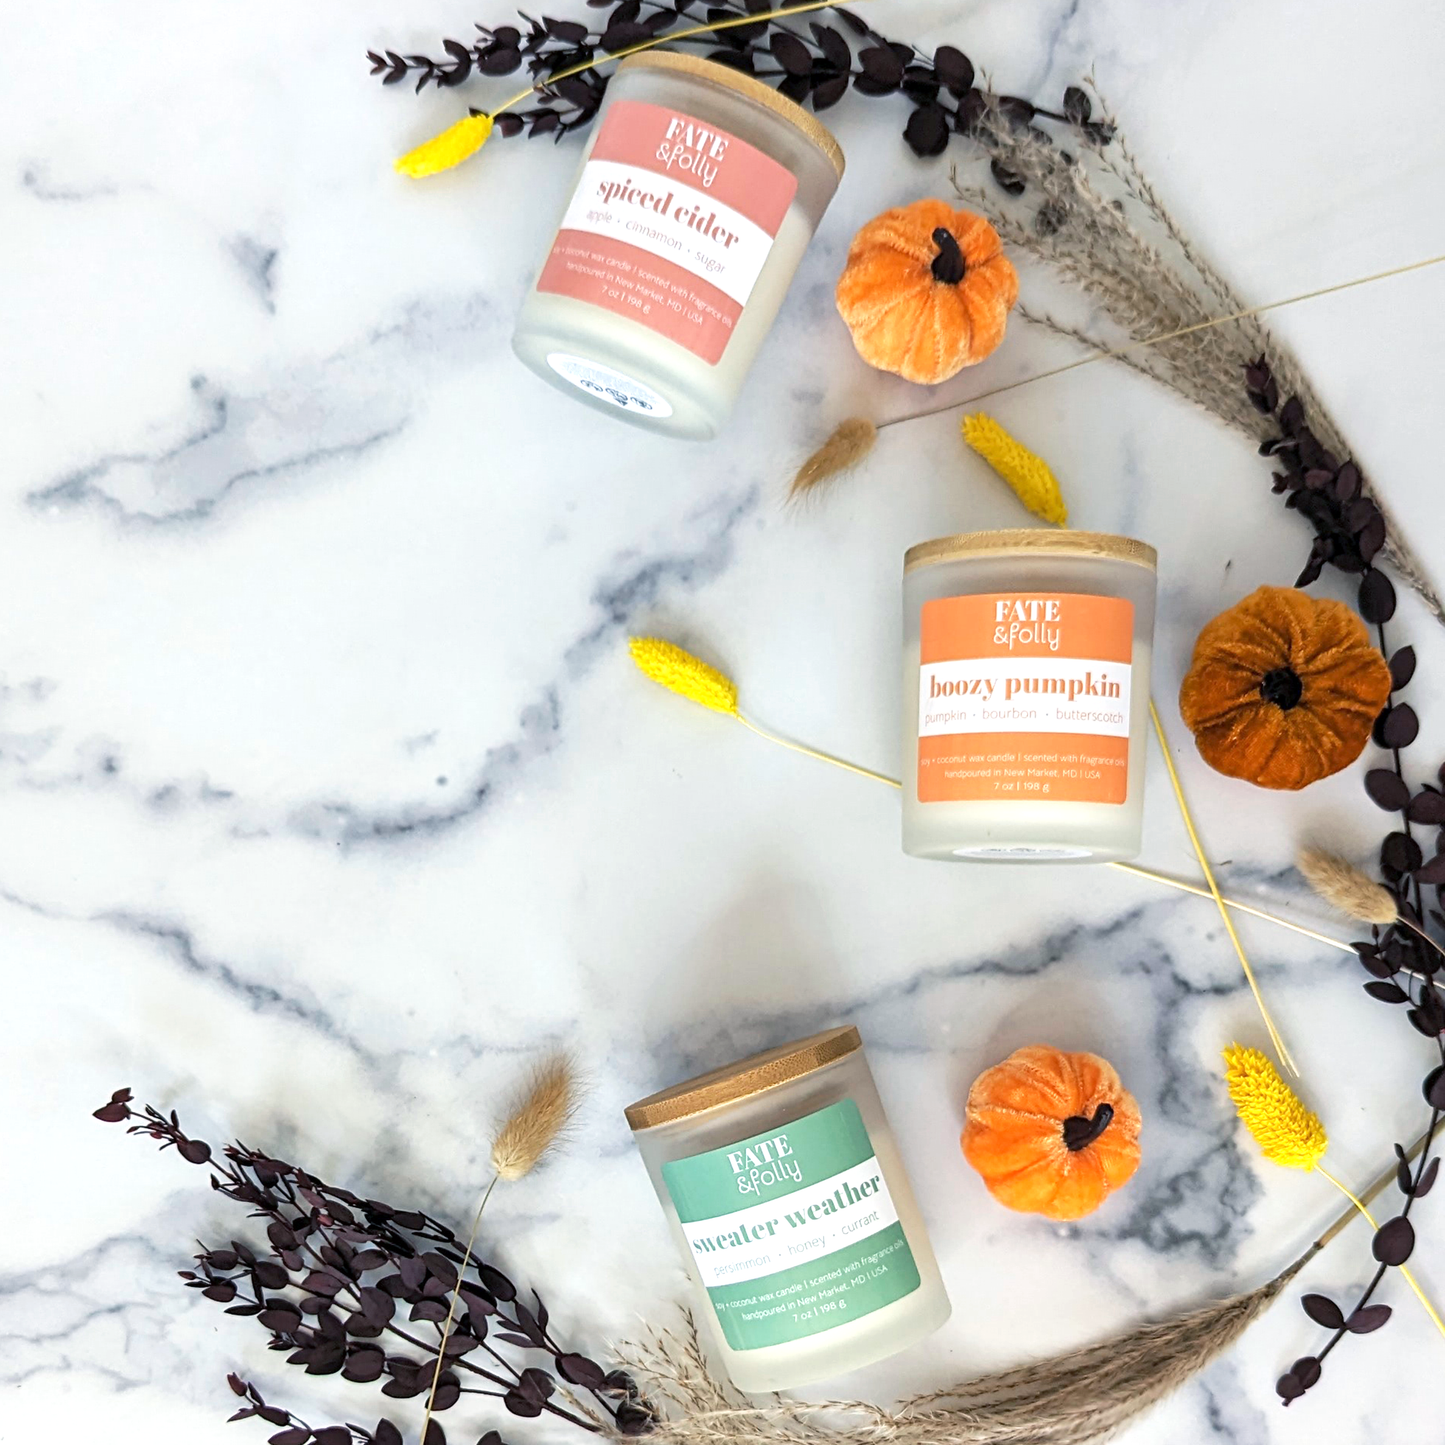 Premium Soy + Coconut Wax Candle with Wood Wick - Sweater Weather